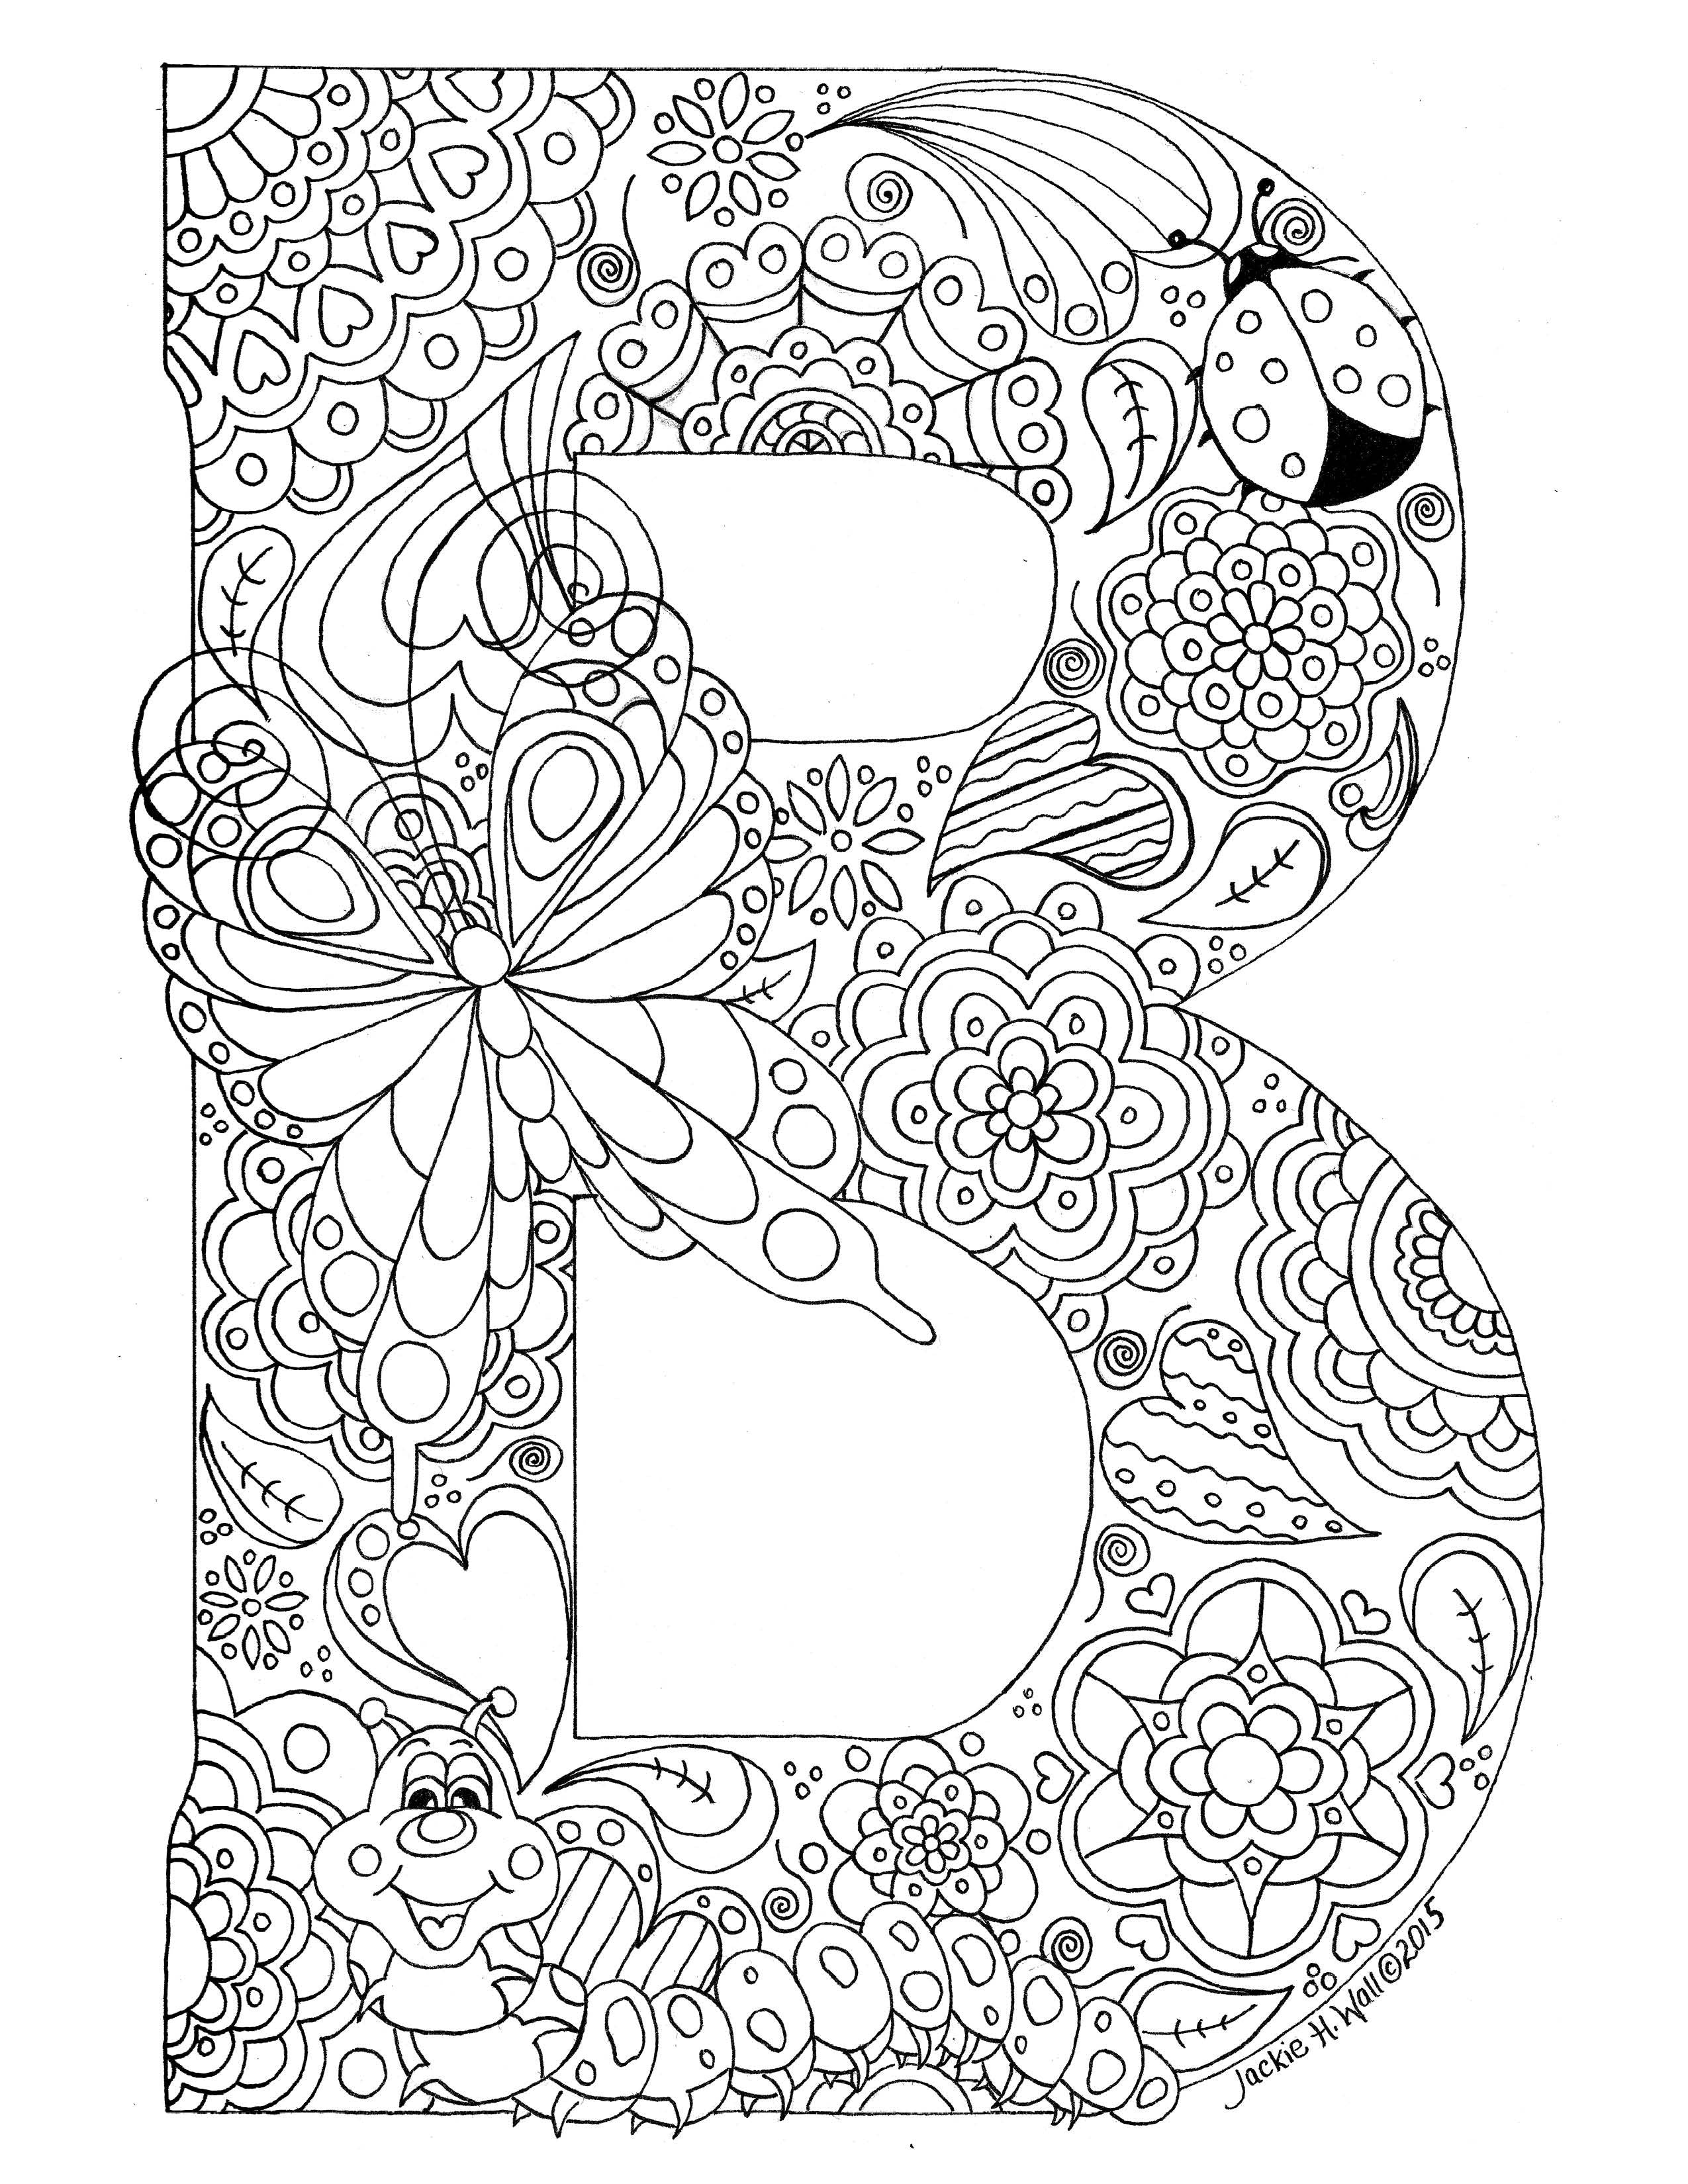 Letter B Colouring Page – Jackie Wall Studio